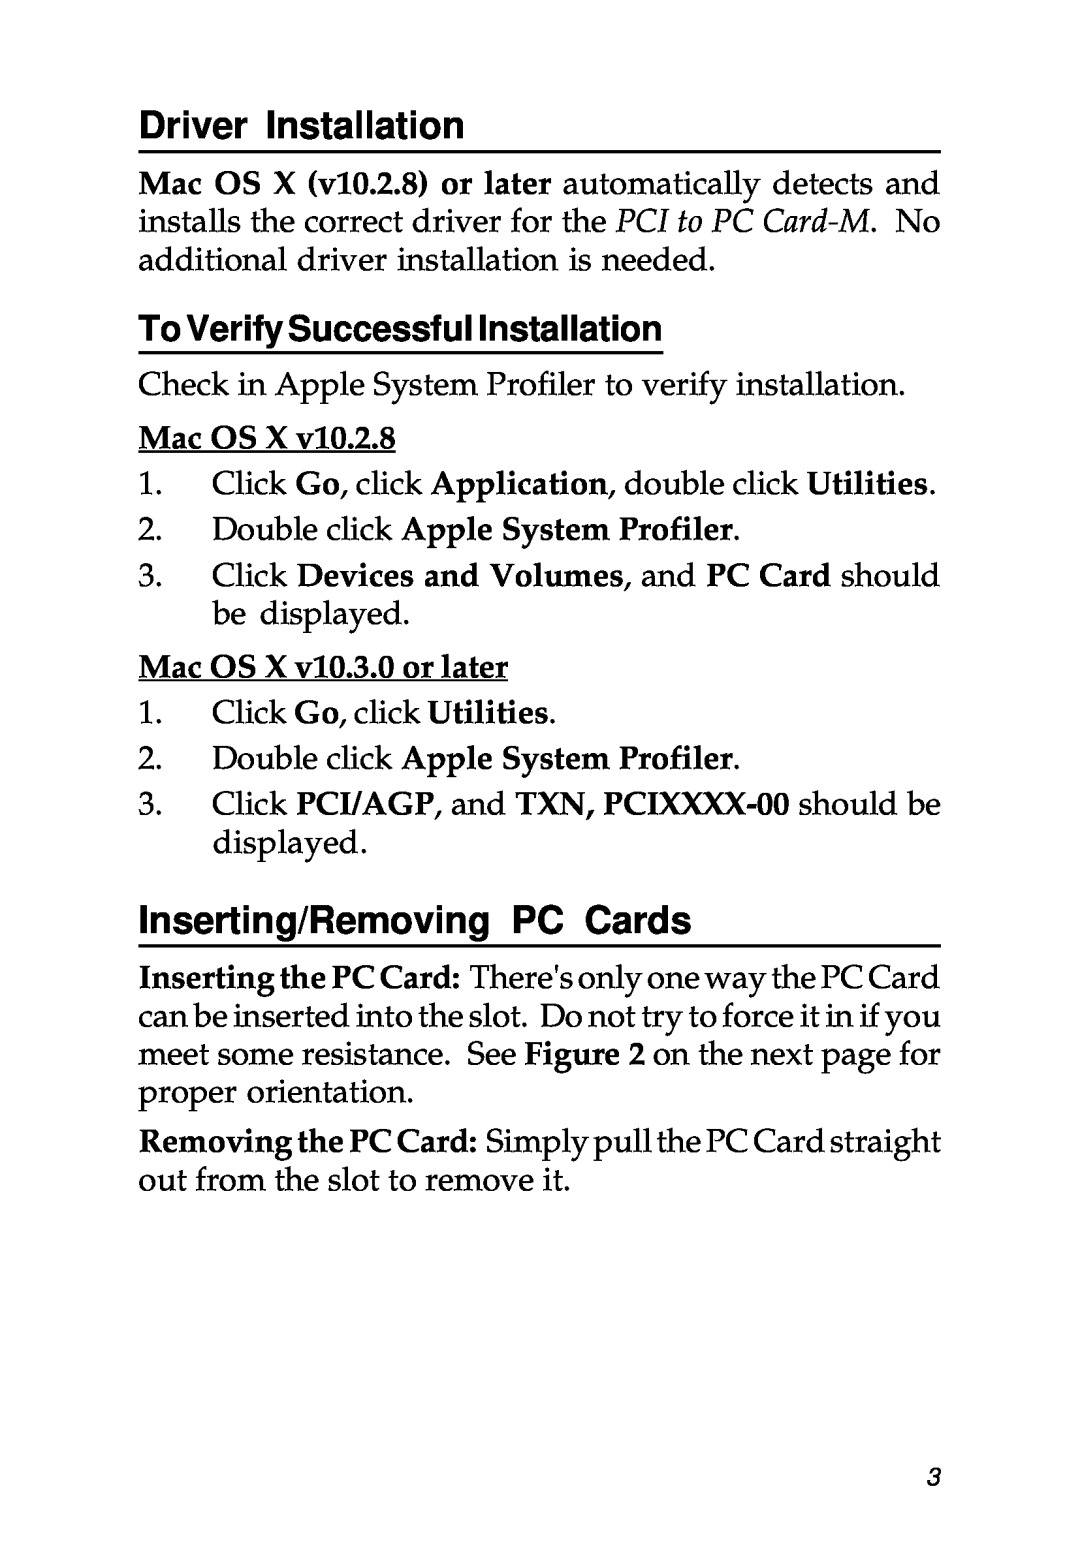 SIIG Network Card manual Driver Installation, Inserting/Removing PC Cards, To Verify Successful Installation, Mac OS X 